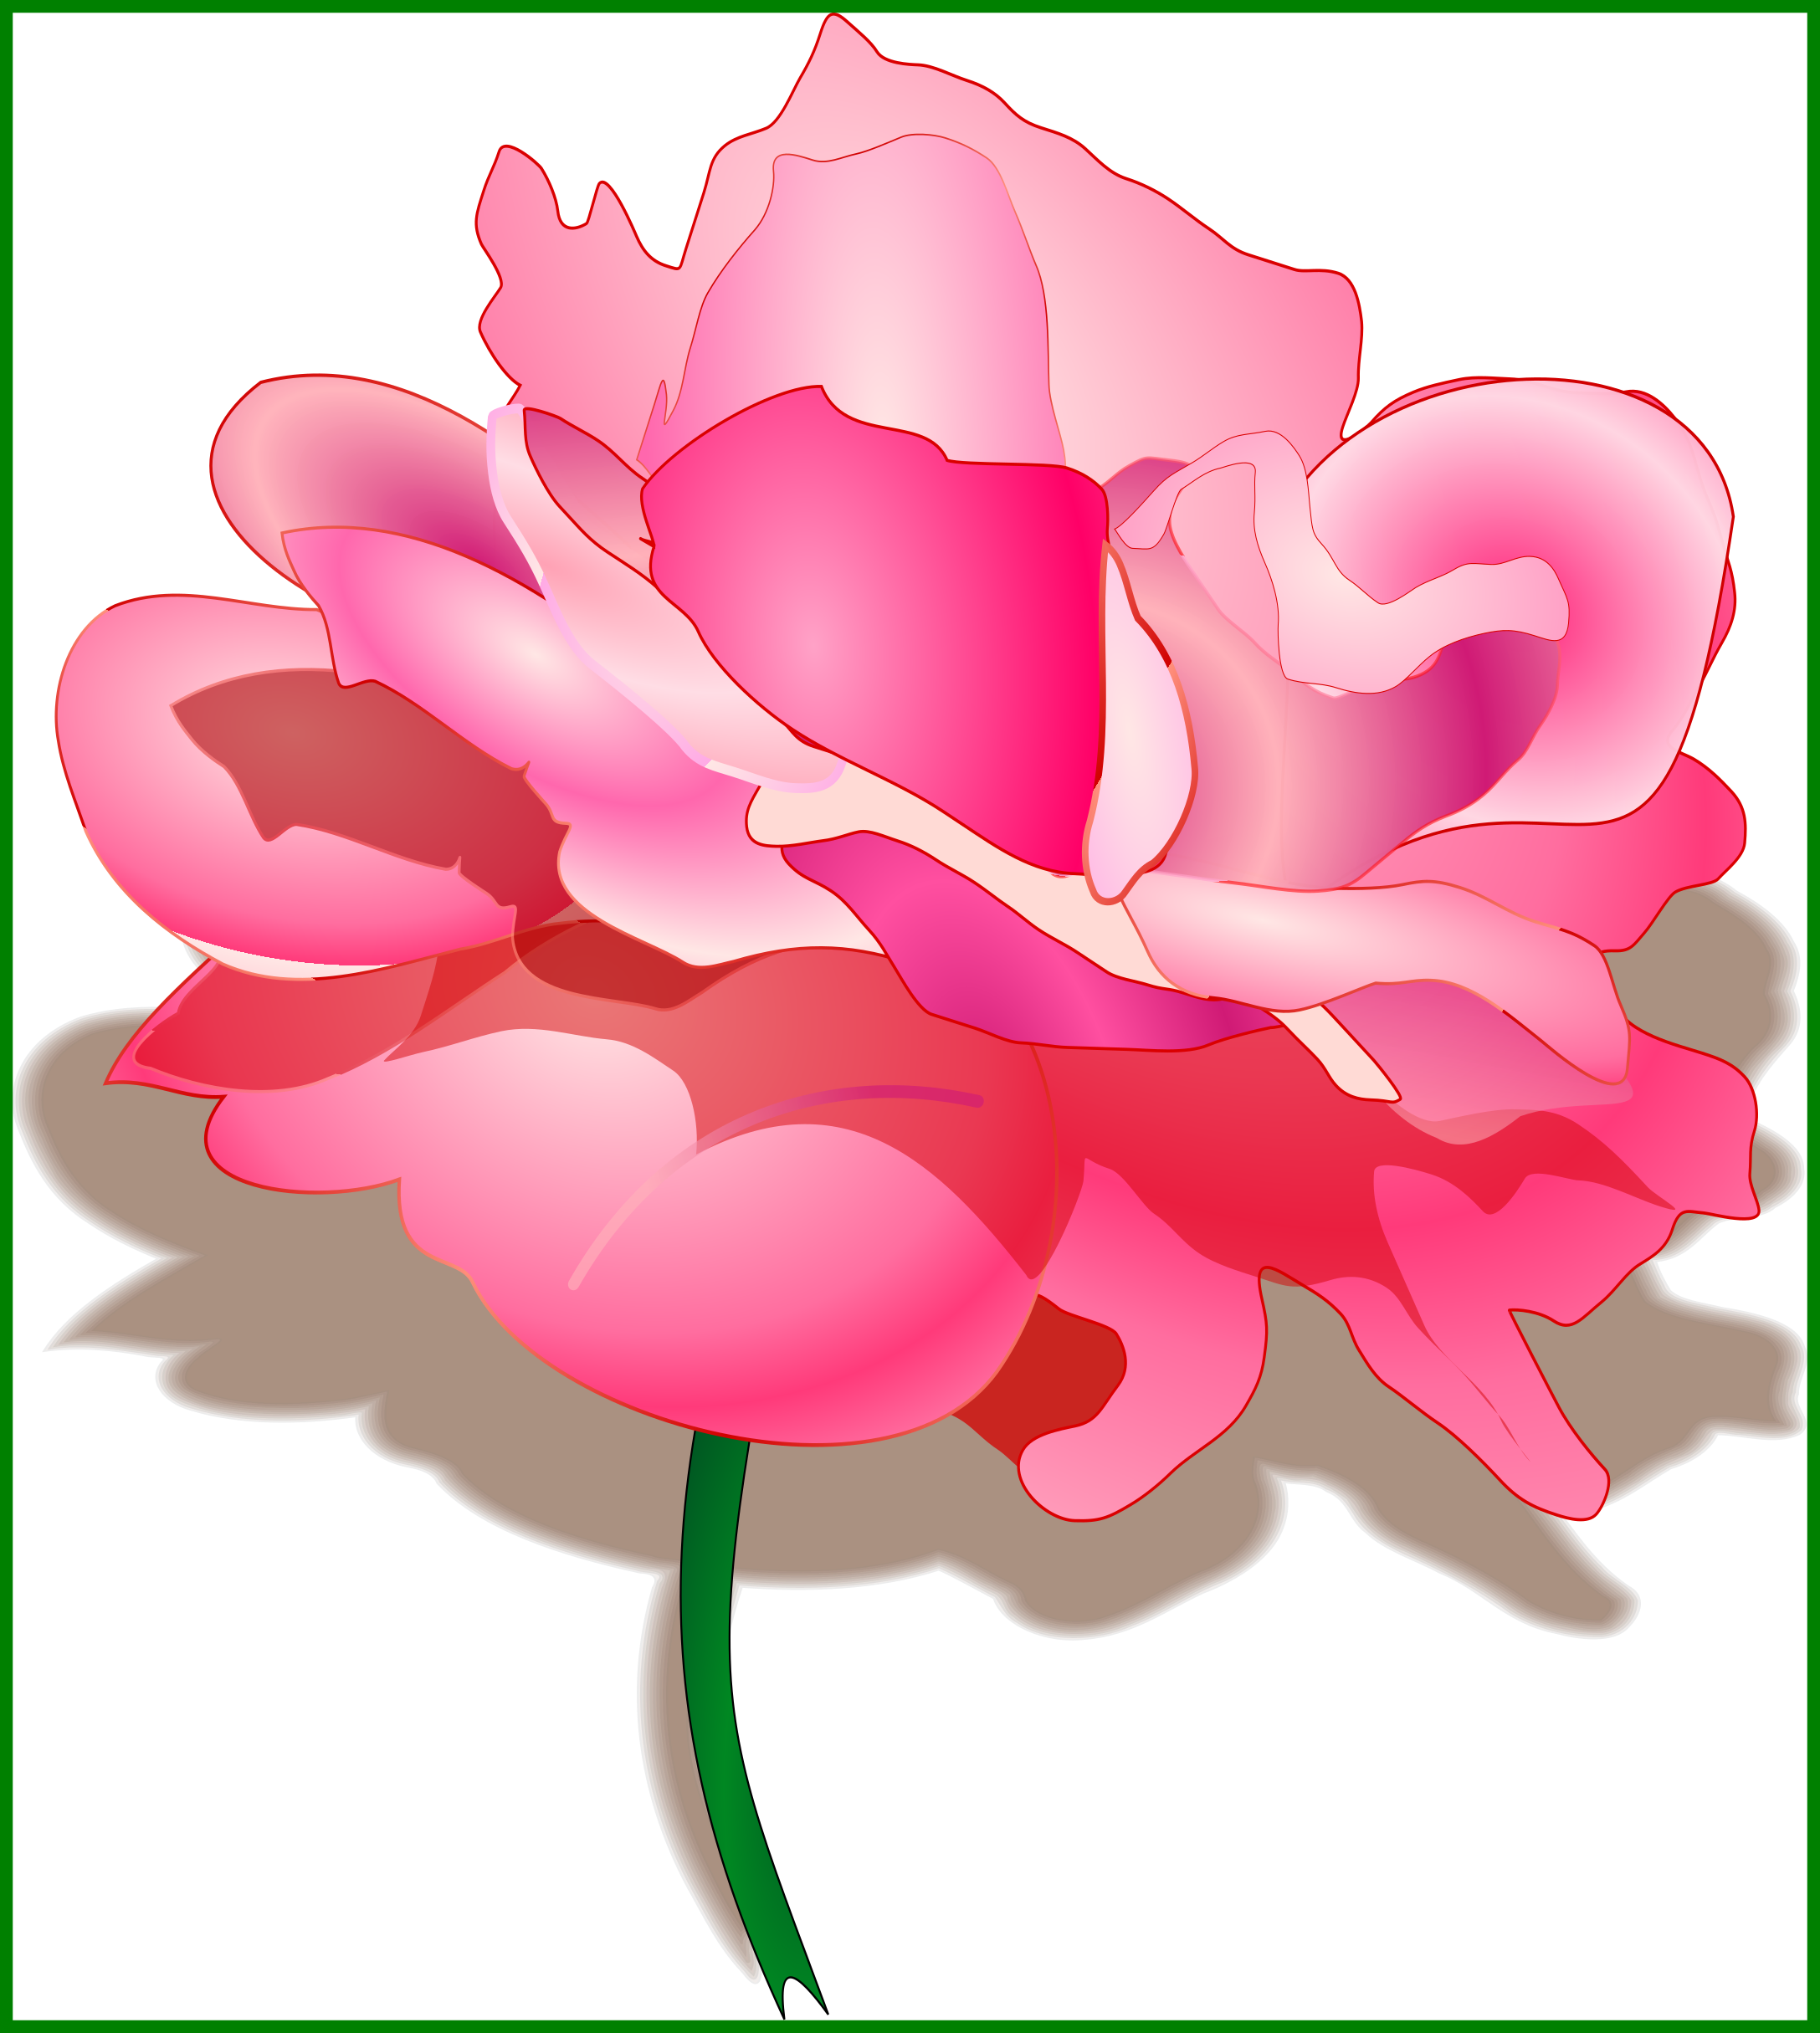 The best watercolor peonies. Peony clipart blush peony